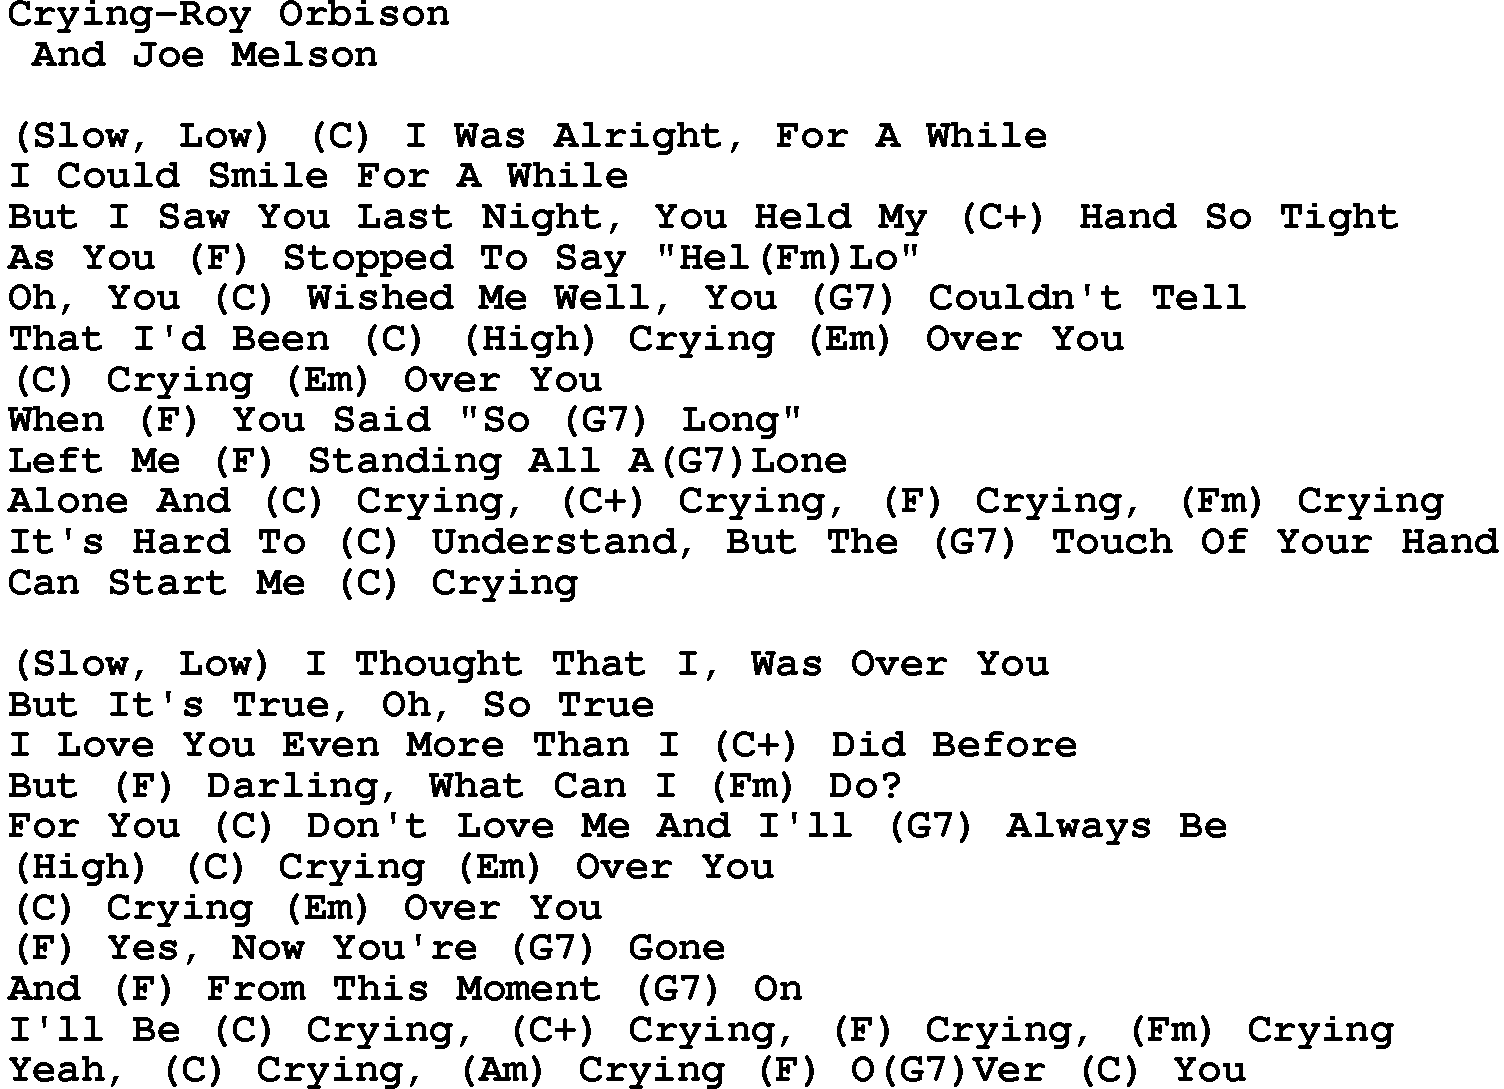 Country music song: Crying-Roy Orbison lyrics and chords